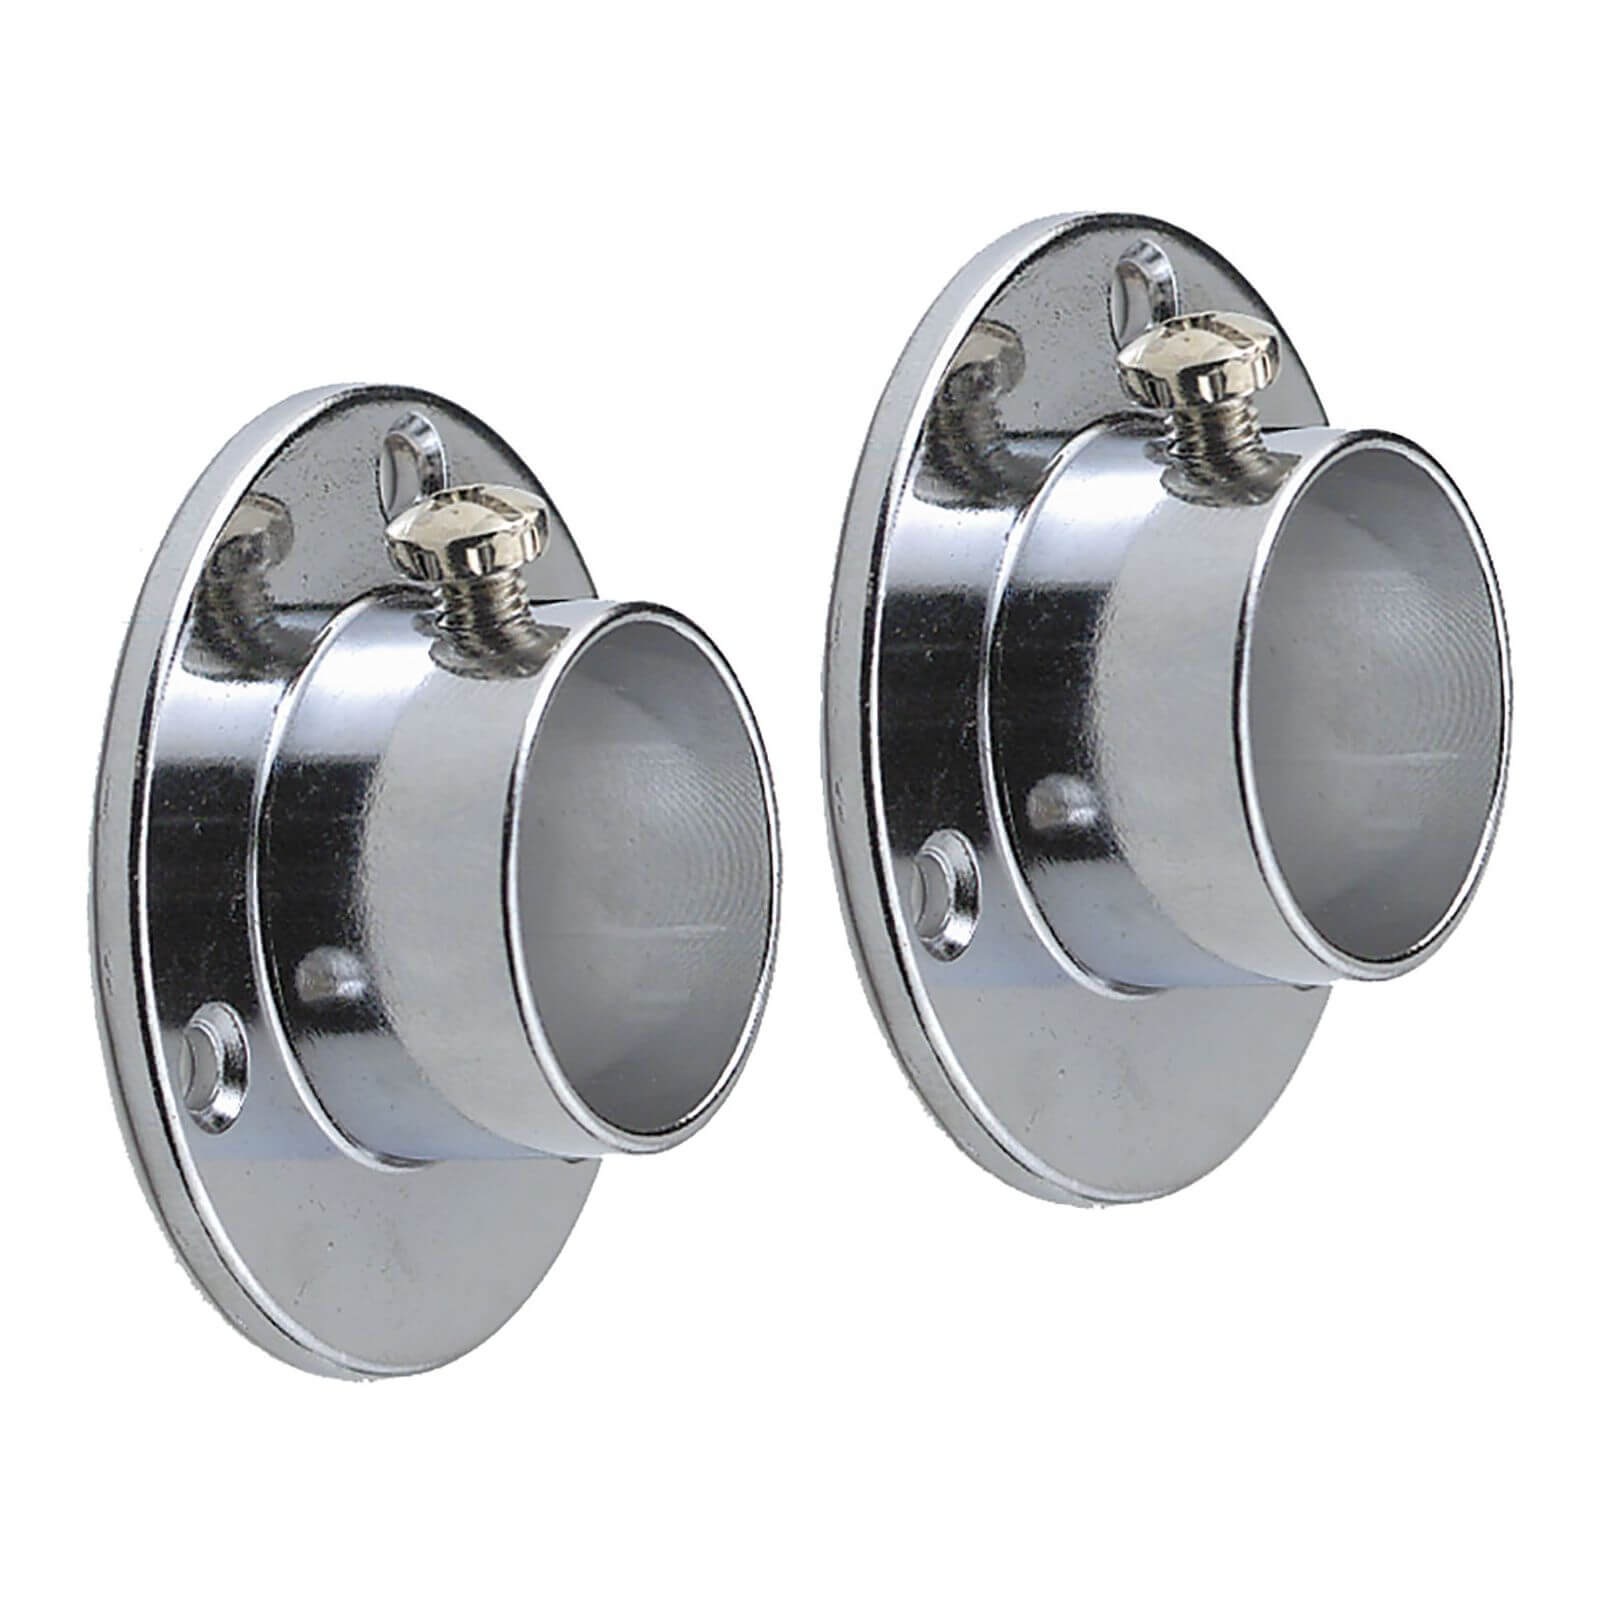 Super Deluxe Sockets - Chrome Plated - 25mm